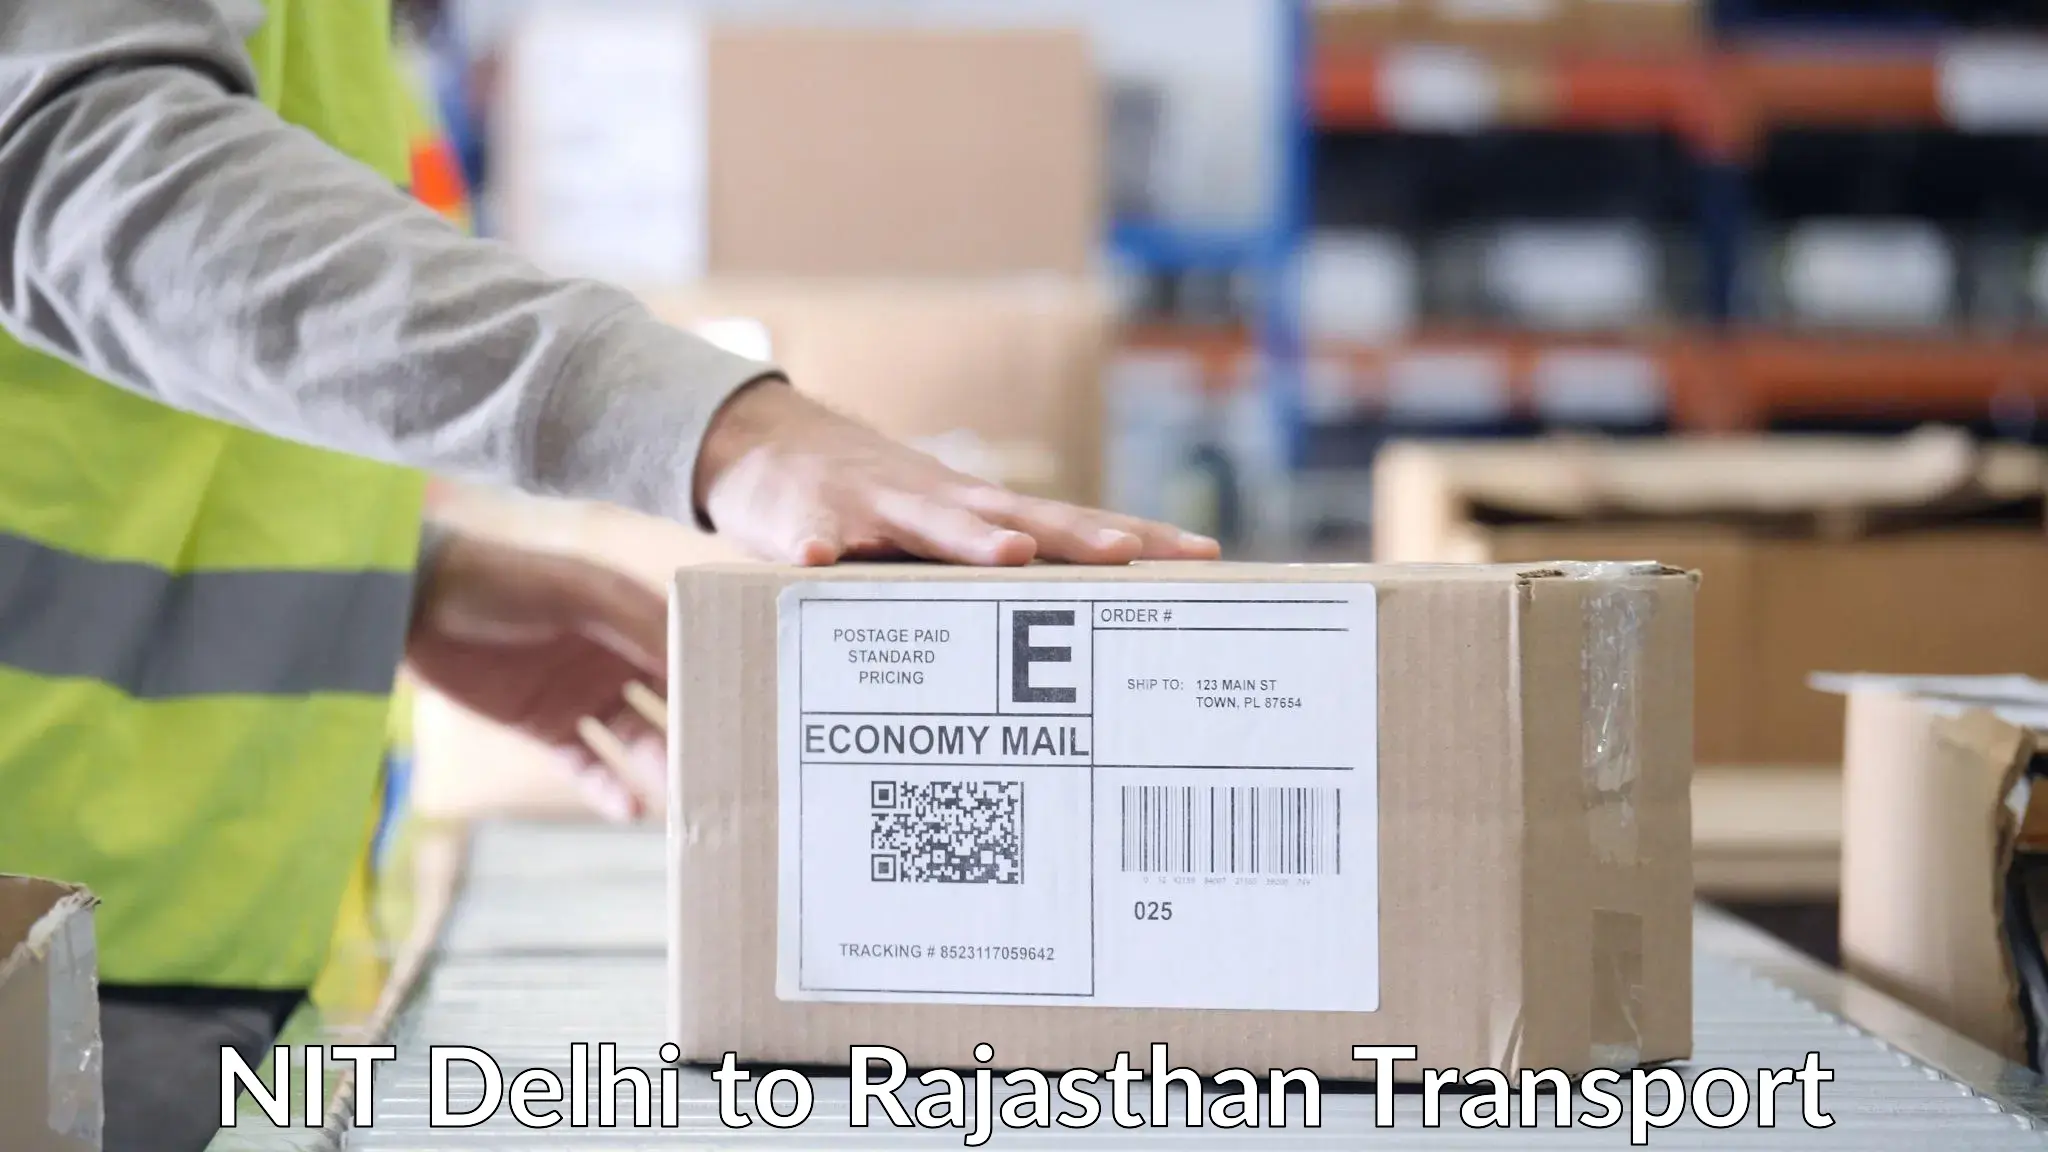 Air freight transport services in NIT Delhi to Fatehpur Sikar